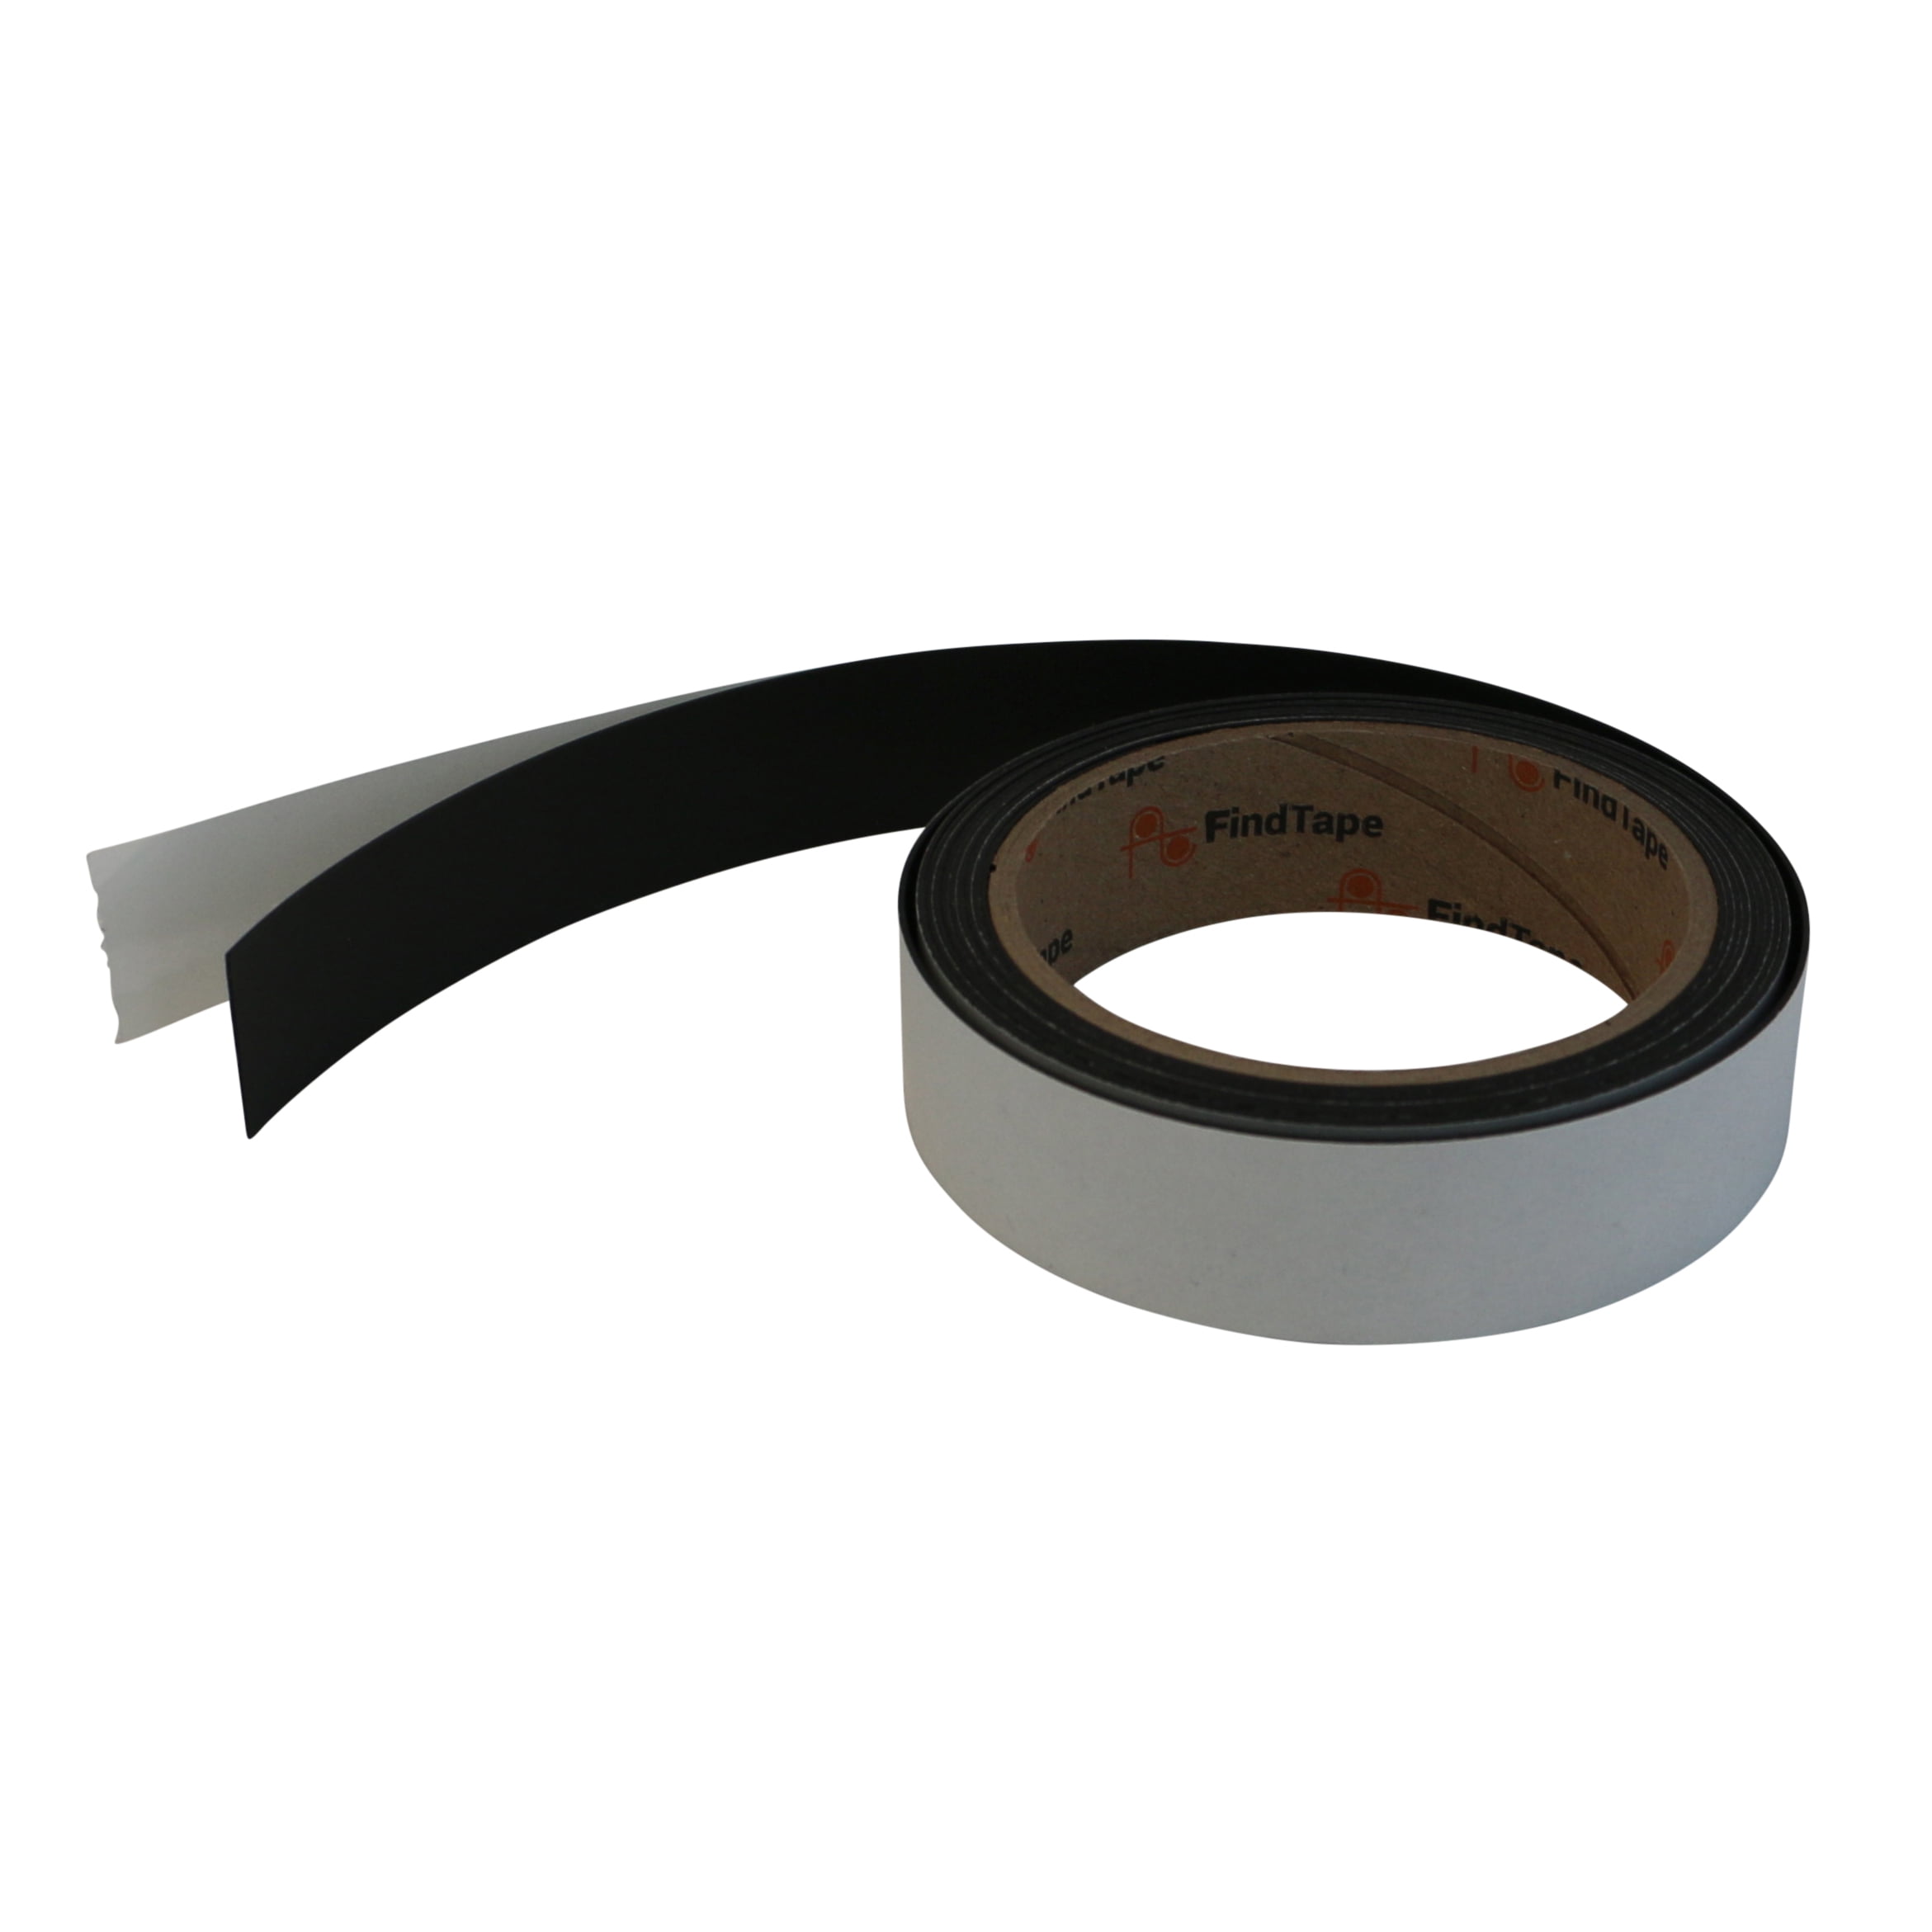 X-bet Flexible Magnetic Tape, Magnetic Strips (1/2 Inch x 10 Ft) 